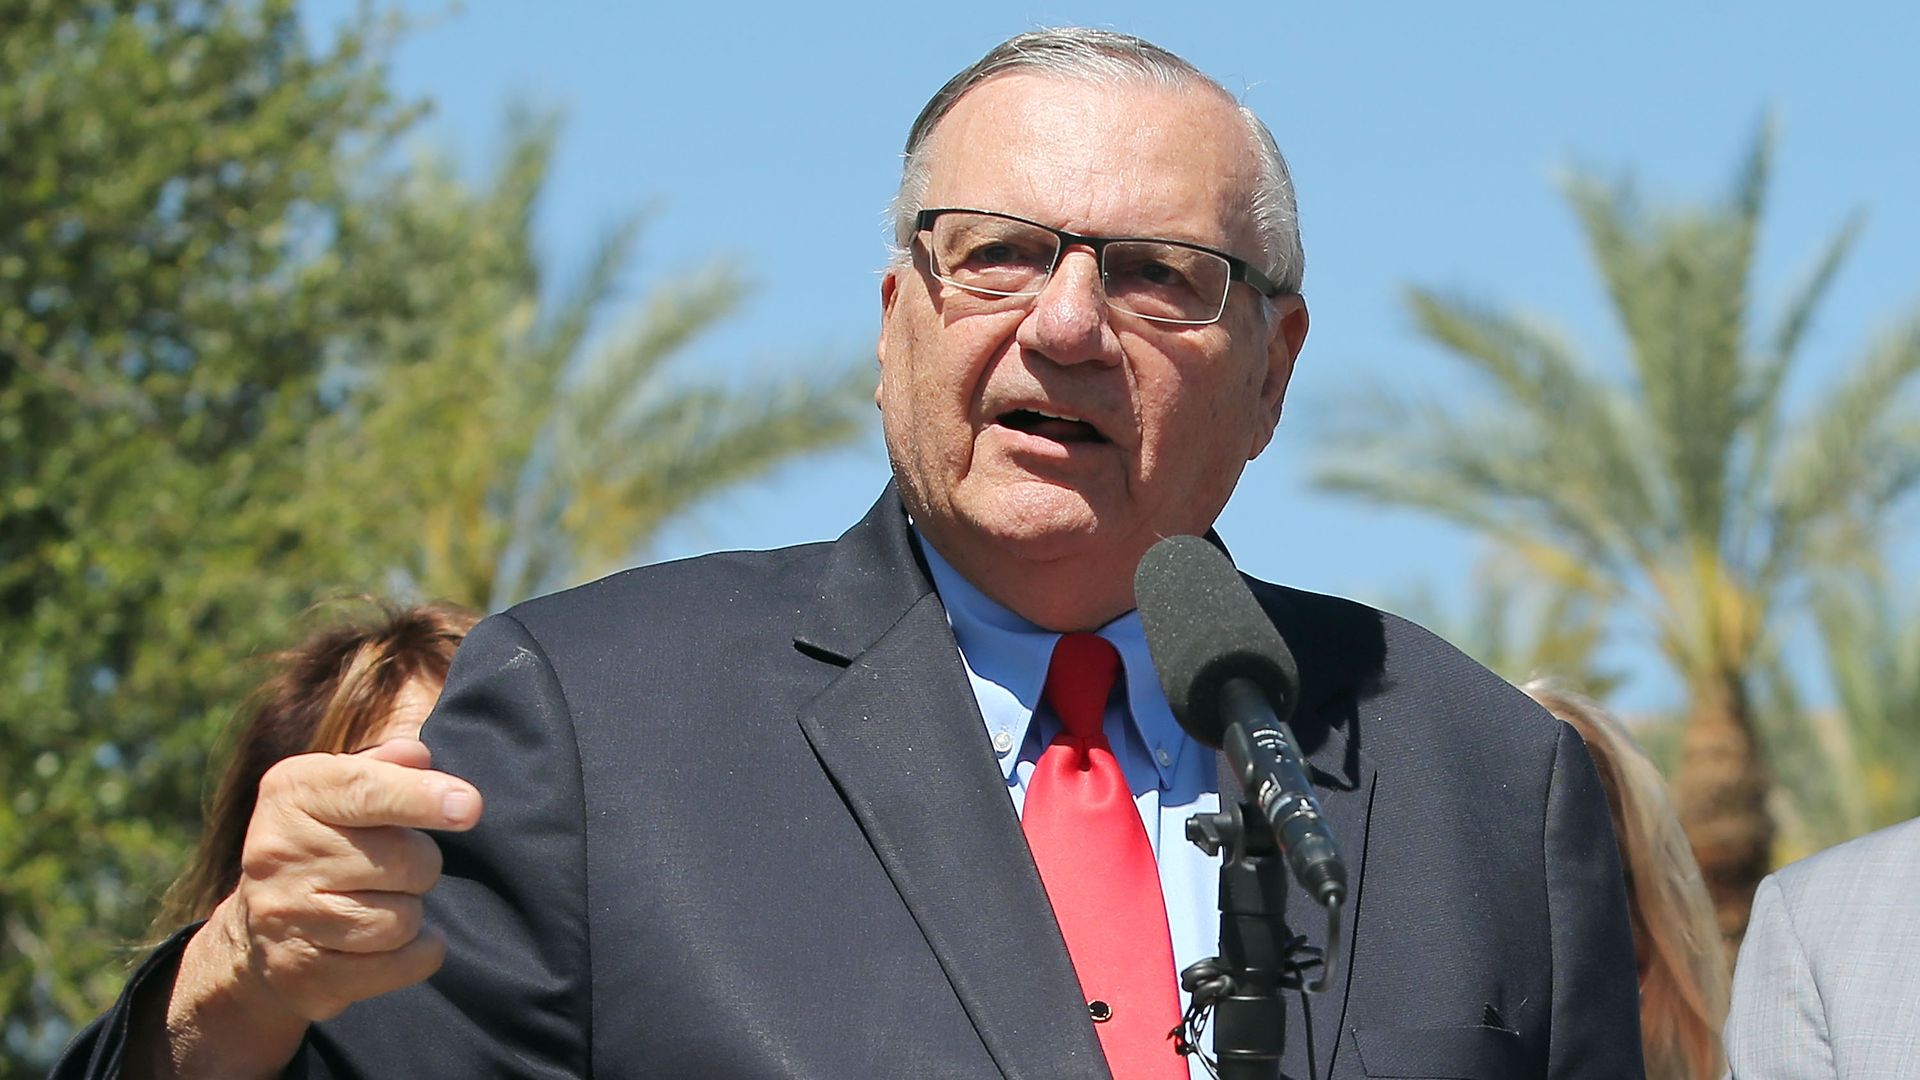 Former Maricopa County Sheriff Joe Arpaio speaks to the media in front of the Arizona State Capitol before filing petitions to run for the U.S. Senate on May 22, 2018 in Phoenix, Arizona. 